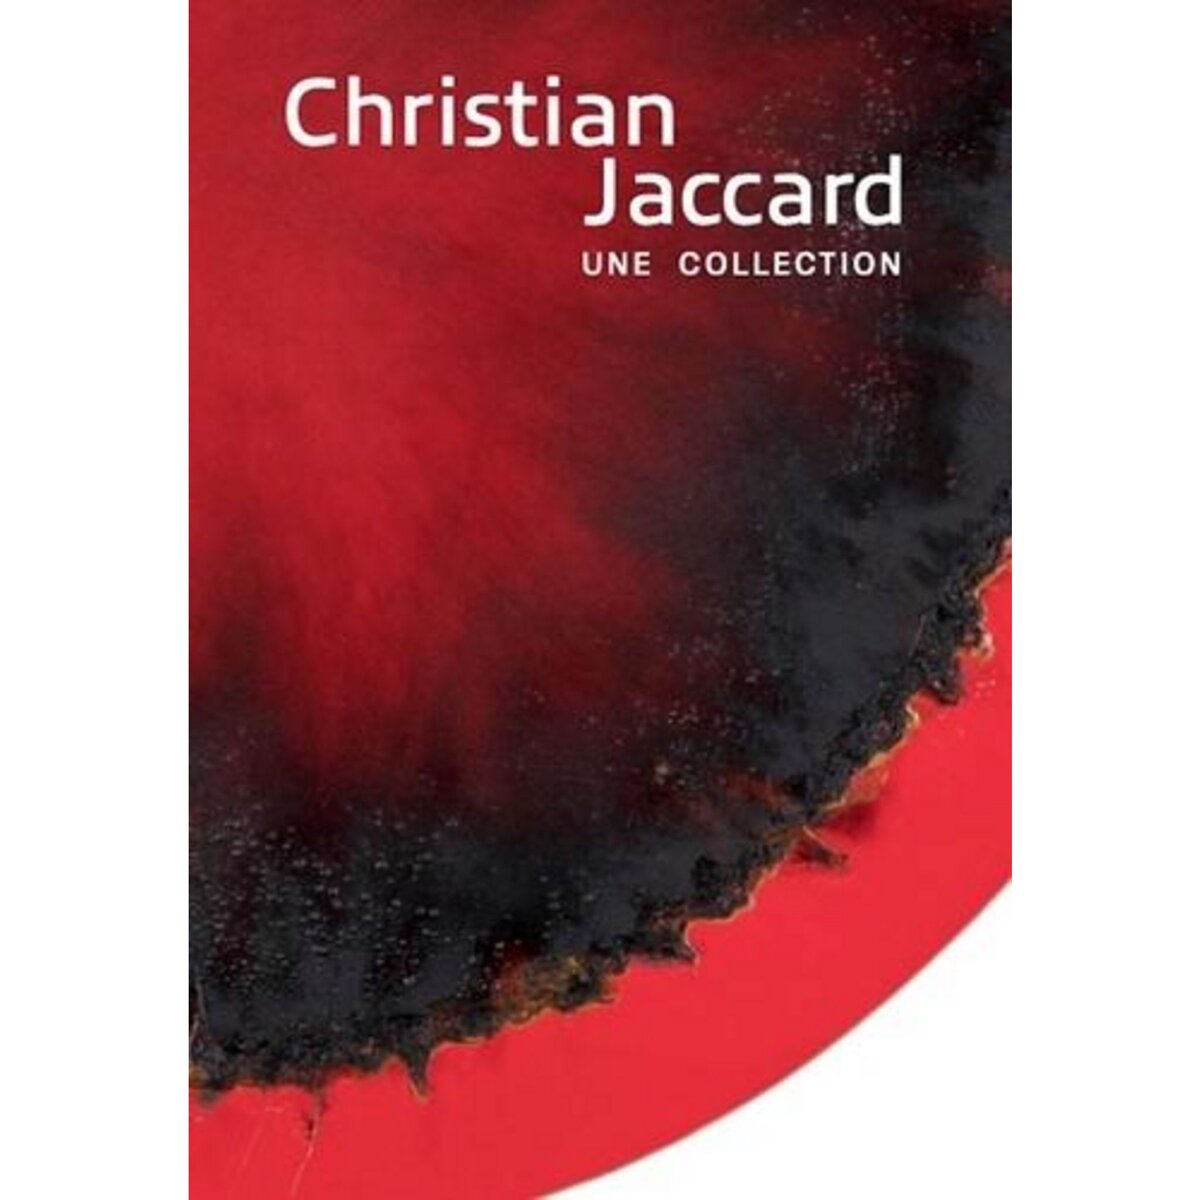  CHRISTIAN JACCARD, UNE COLLECTION, Jaccard Christian